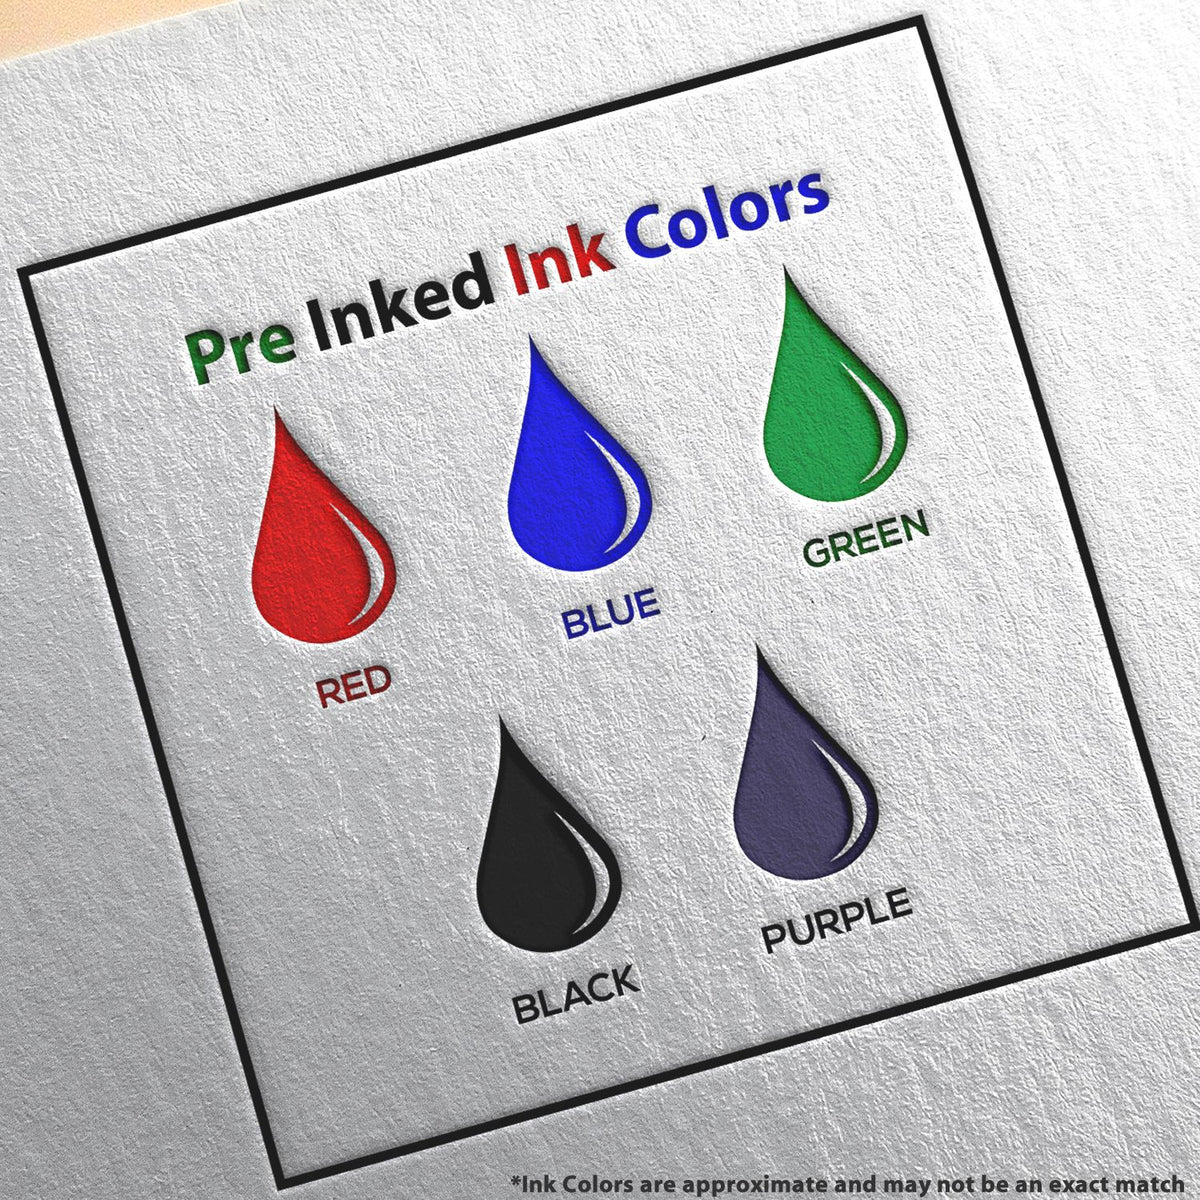 A picture showing the different ink colors or hues available for the MaxLight Premium Pre-Inked Missouri Rectangular Notarial Stamp product.